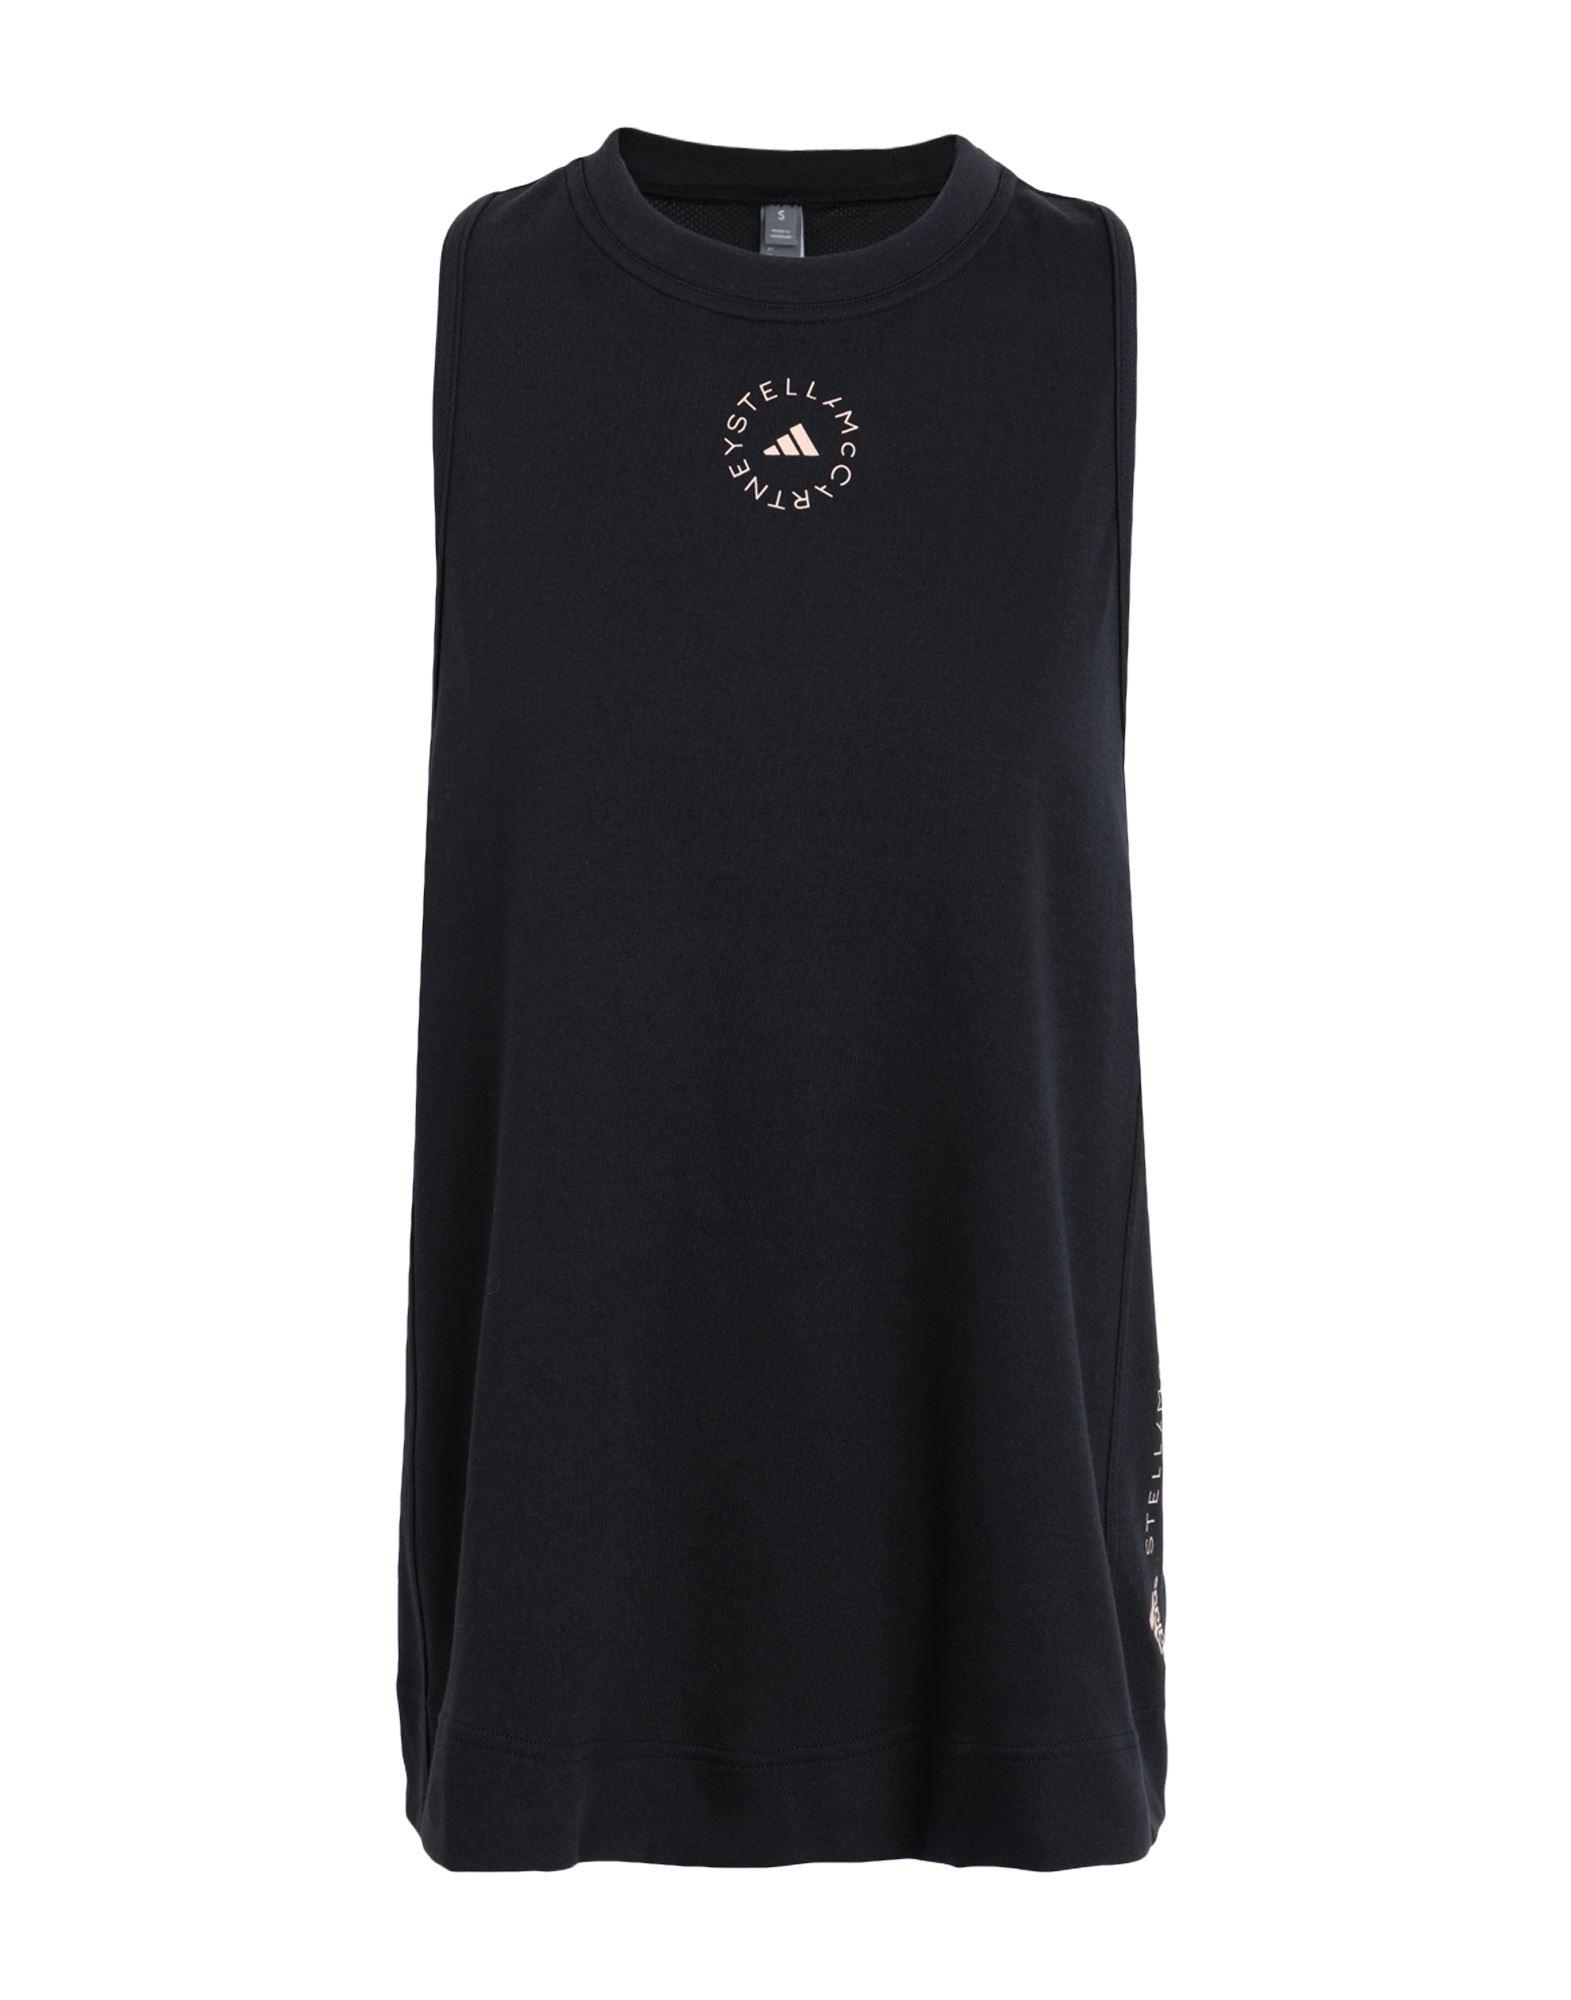 adidas By Stella McCartney Synthetic Tank Top in Black - Lyst